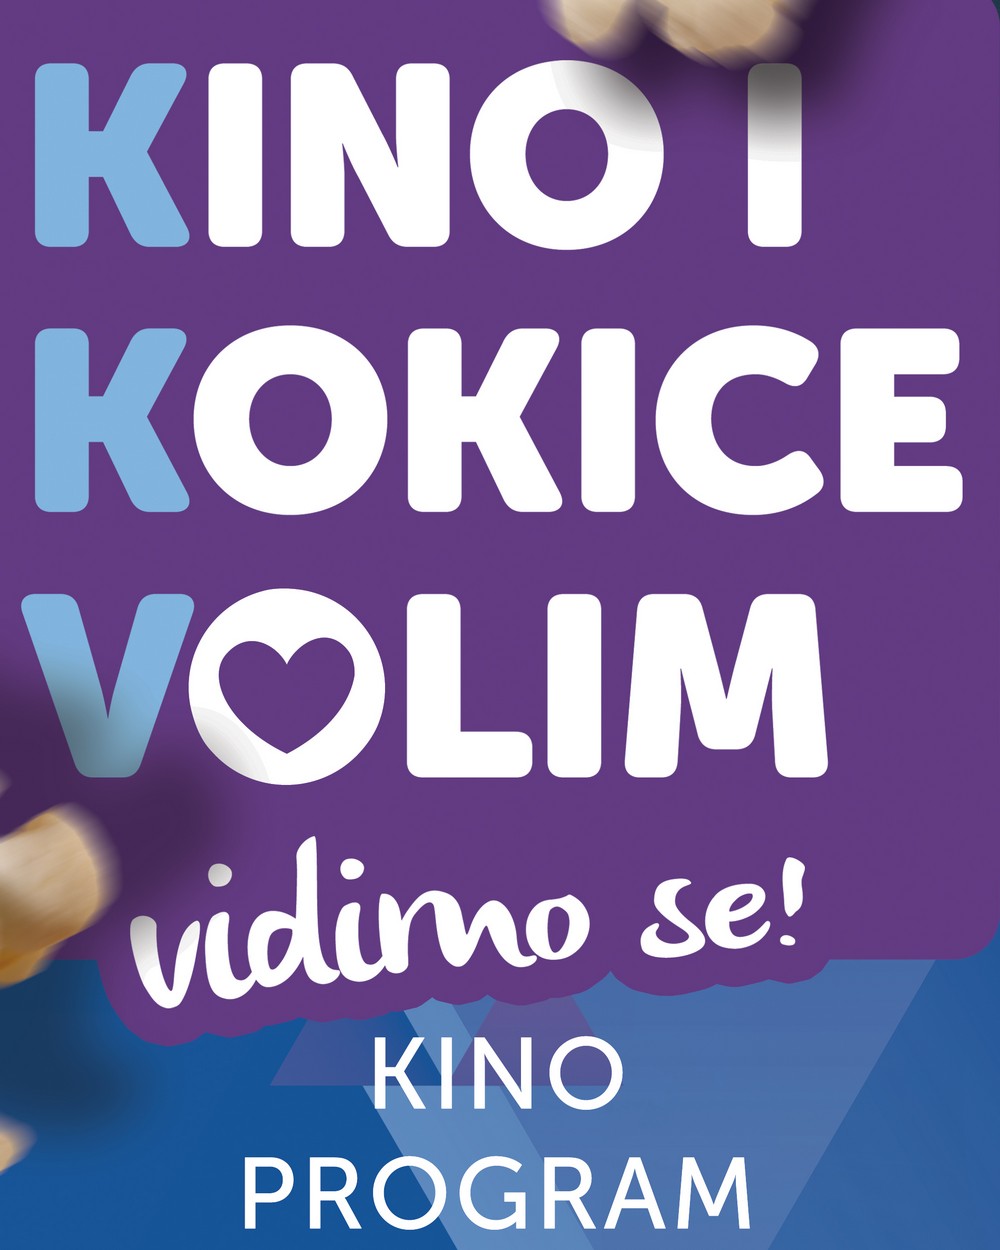 You are currently viewing Kino i Kokice Volim